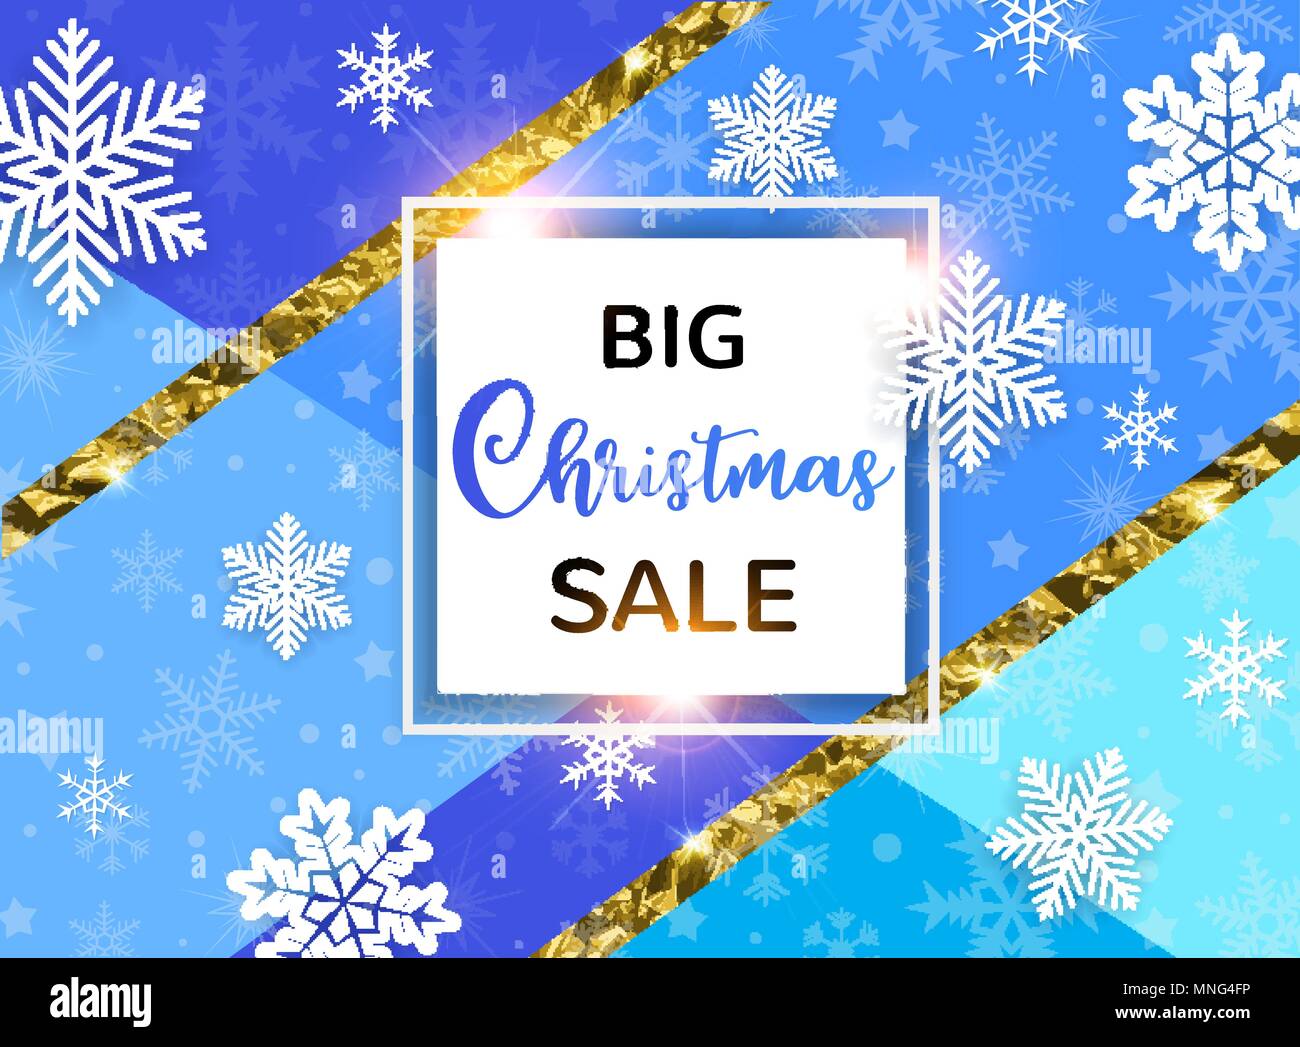 Abstract vector background for seasonal Christmas sale. White snowflakes on a blue background. Stock Vector